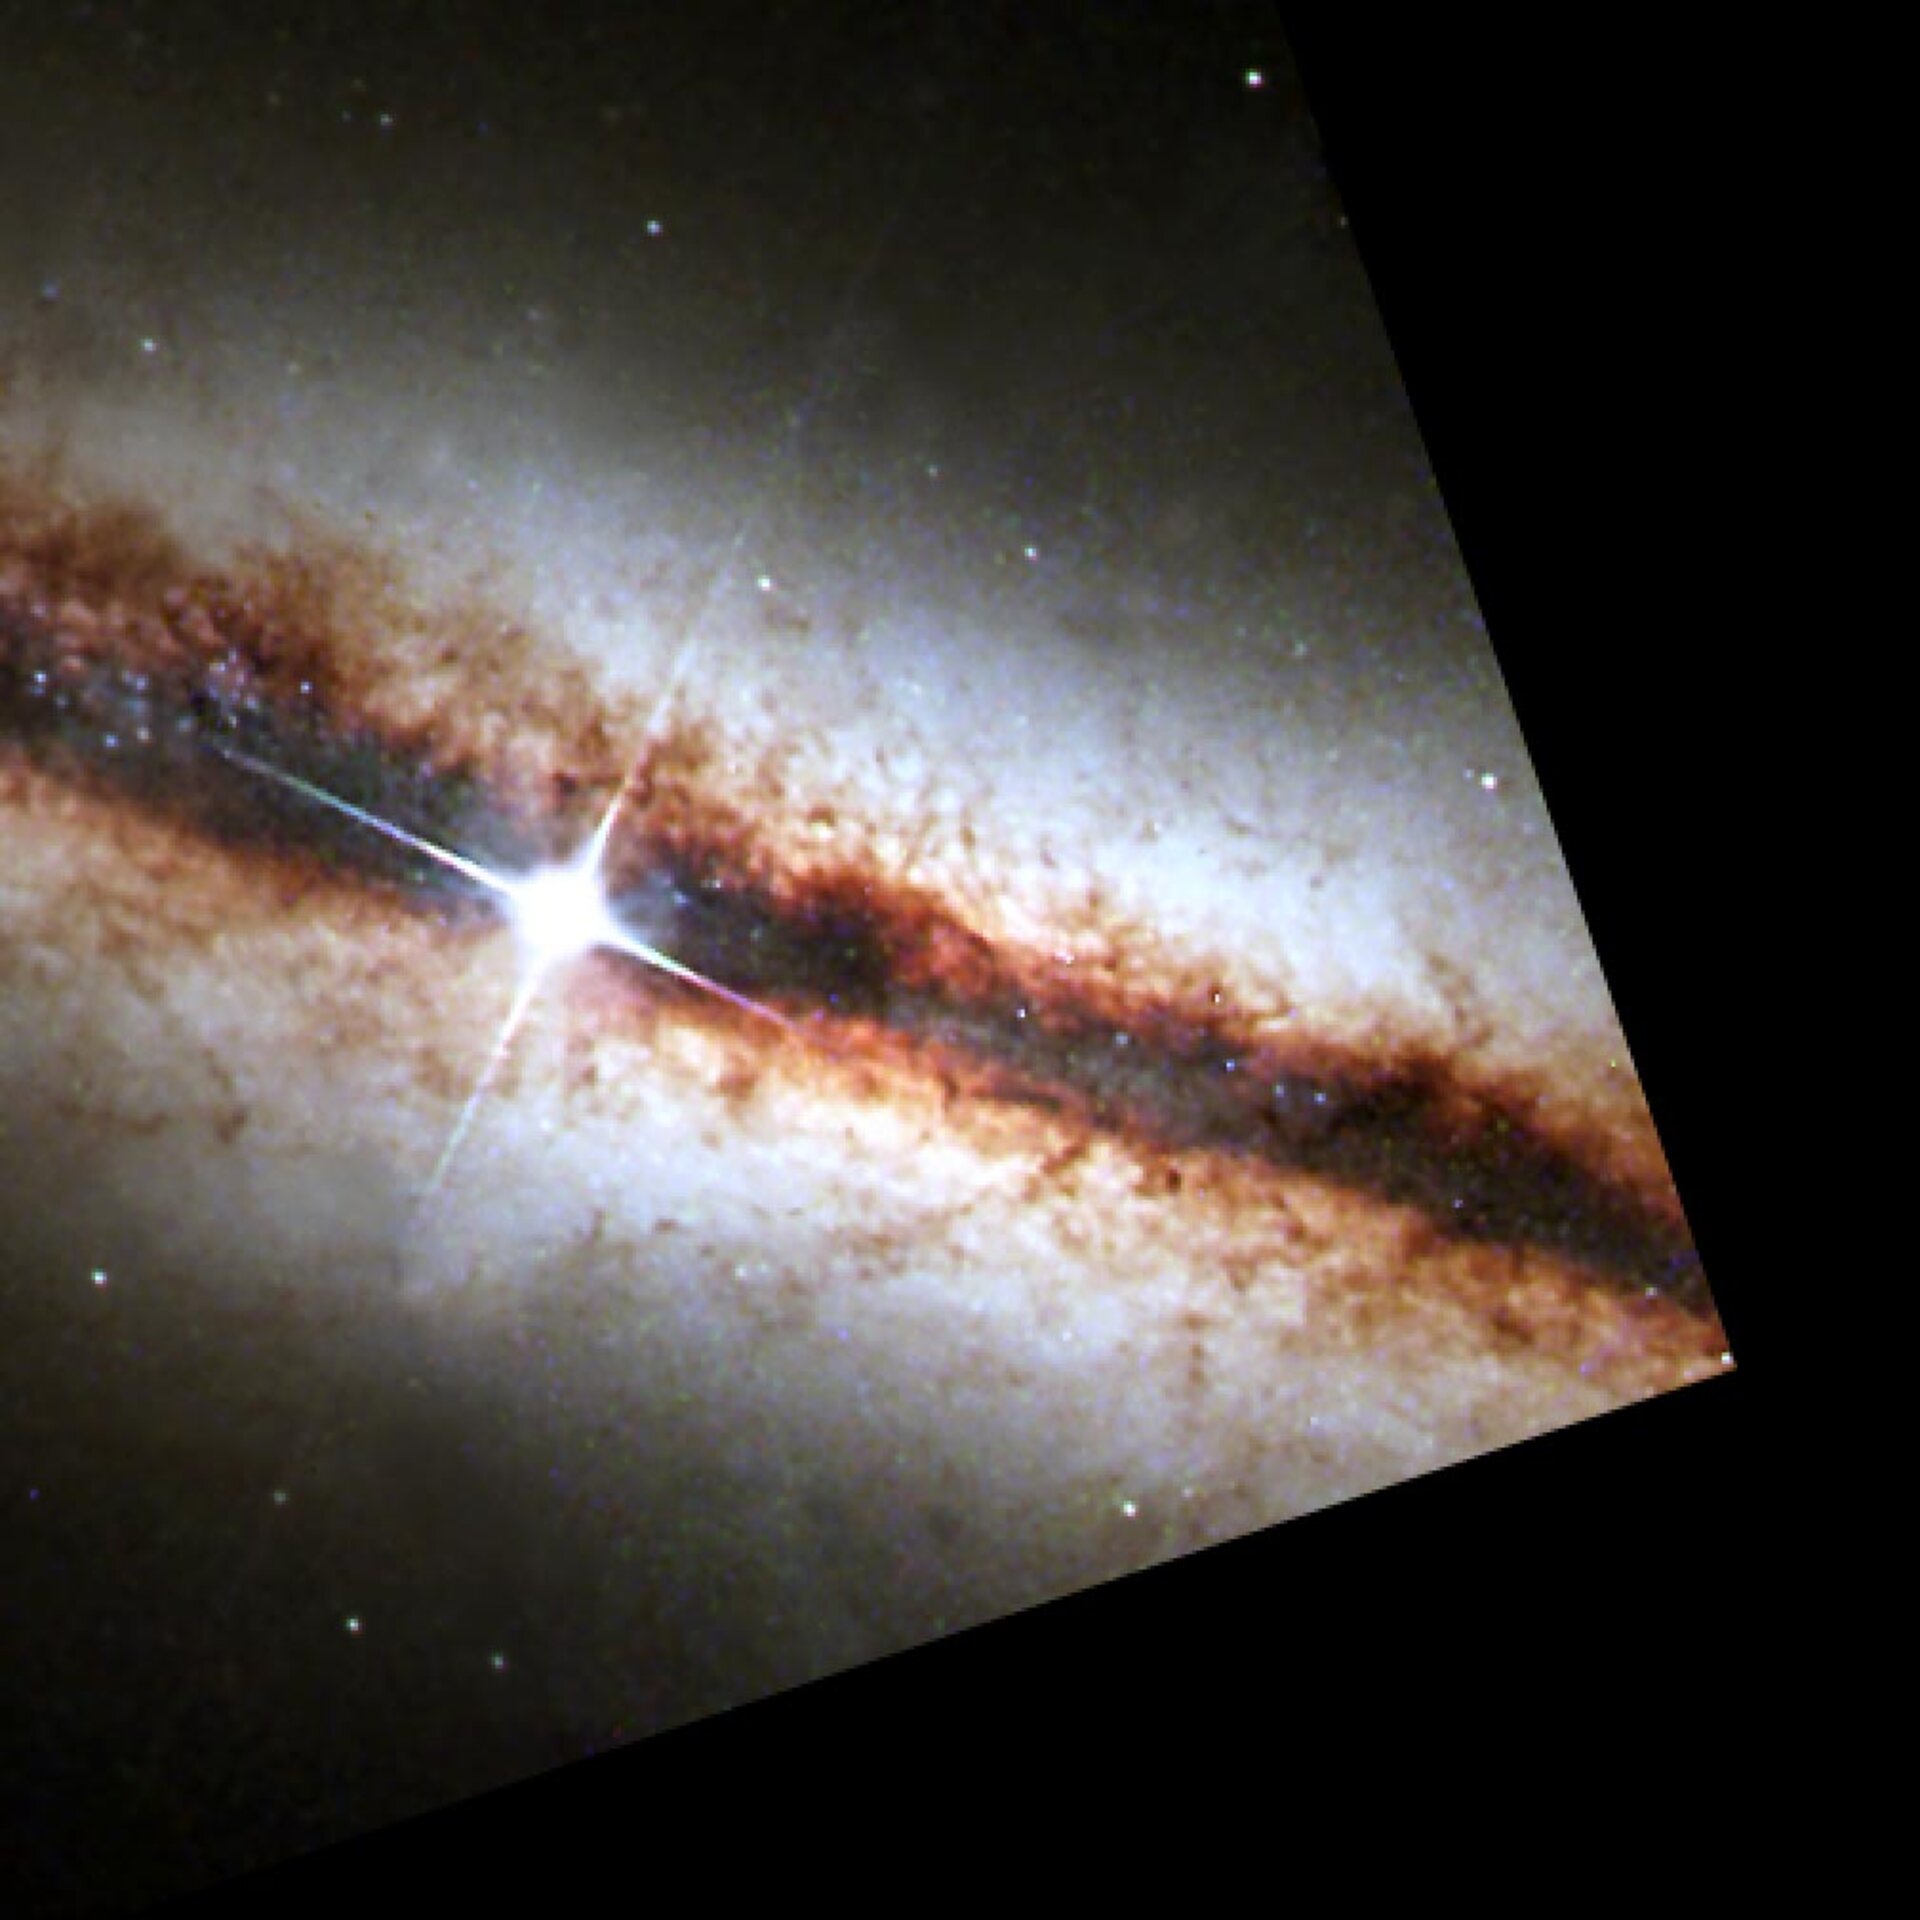 NICMOS finds a golden ring at the heart of a galaxy (WFPC2 image)